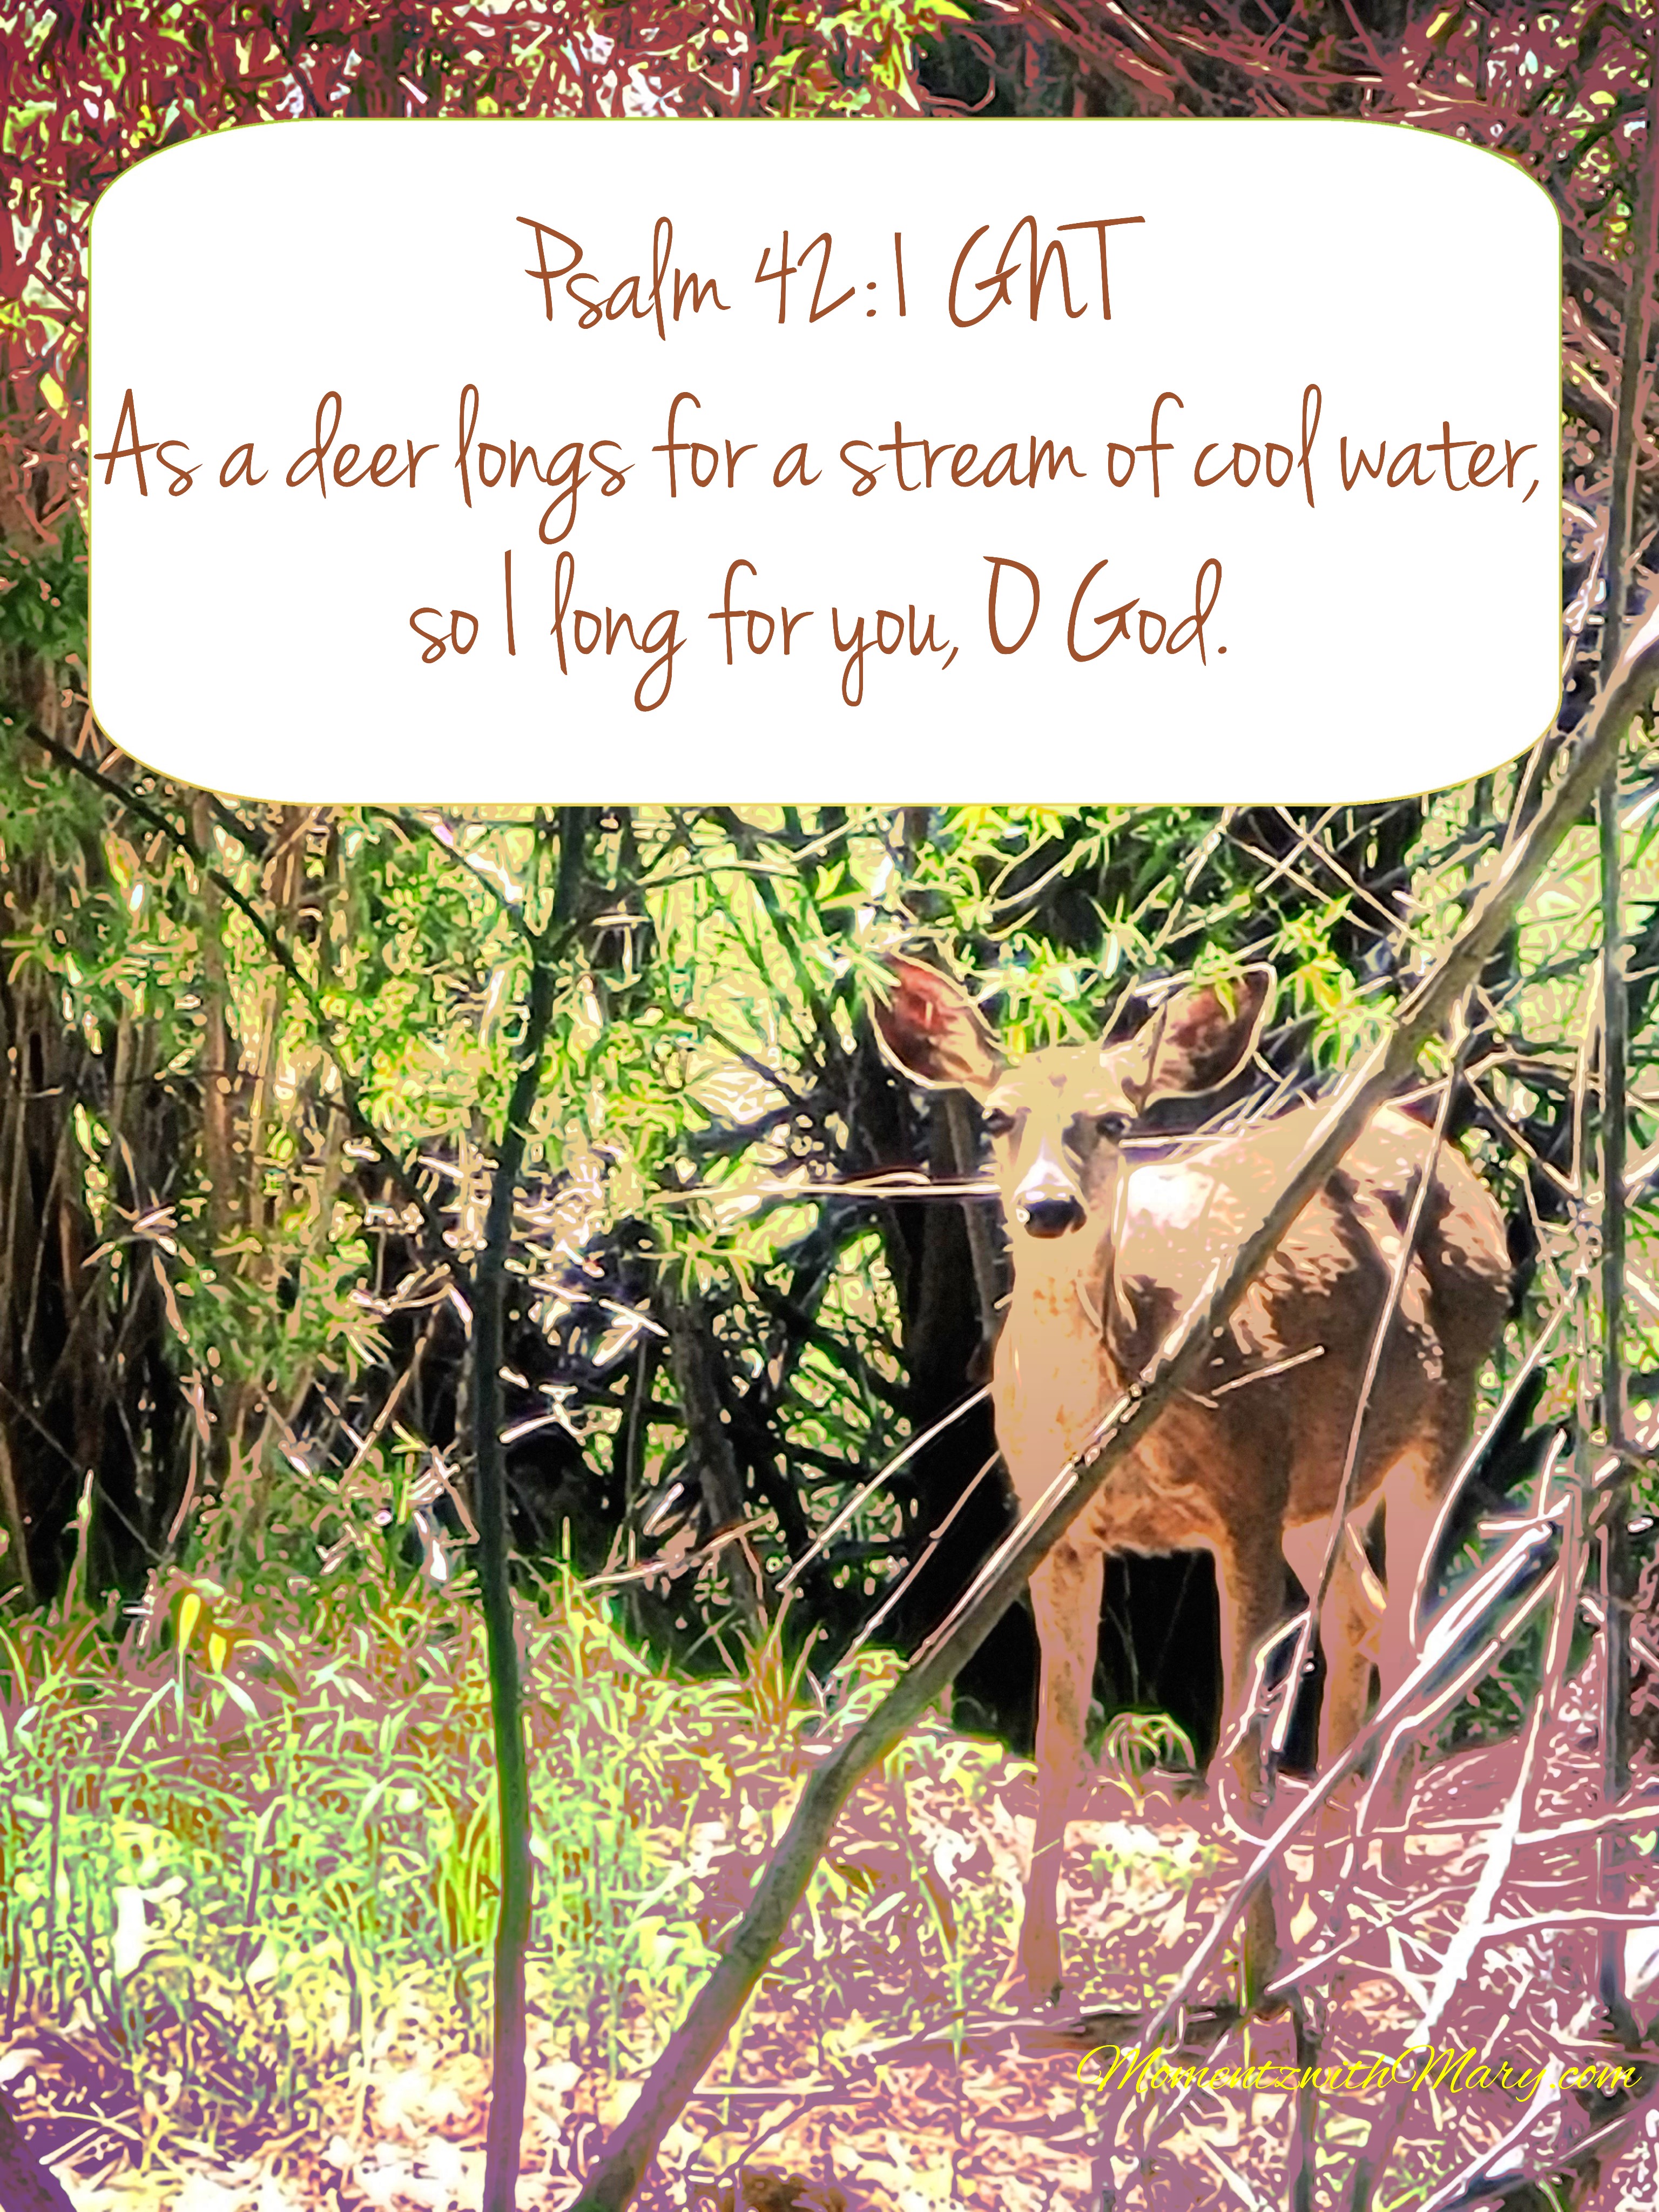 small doe deer standing in wooded thicket Psalm 42:1 GNT As a deer longs for a stream of cool water, so I long for you, O God